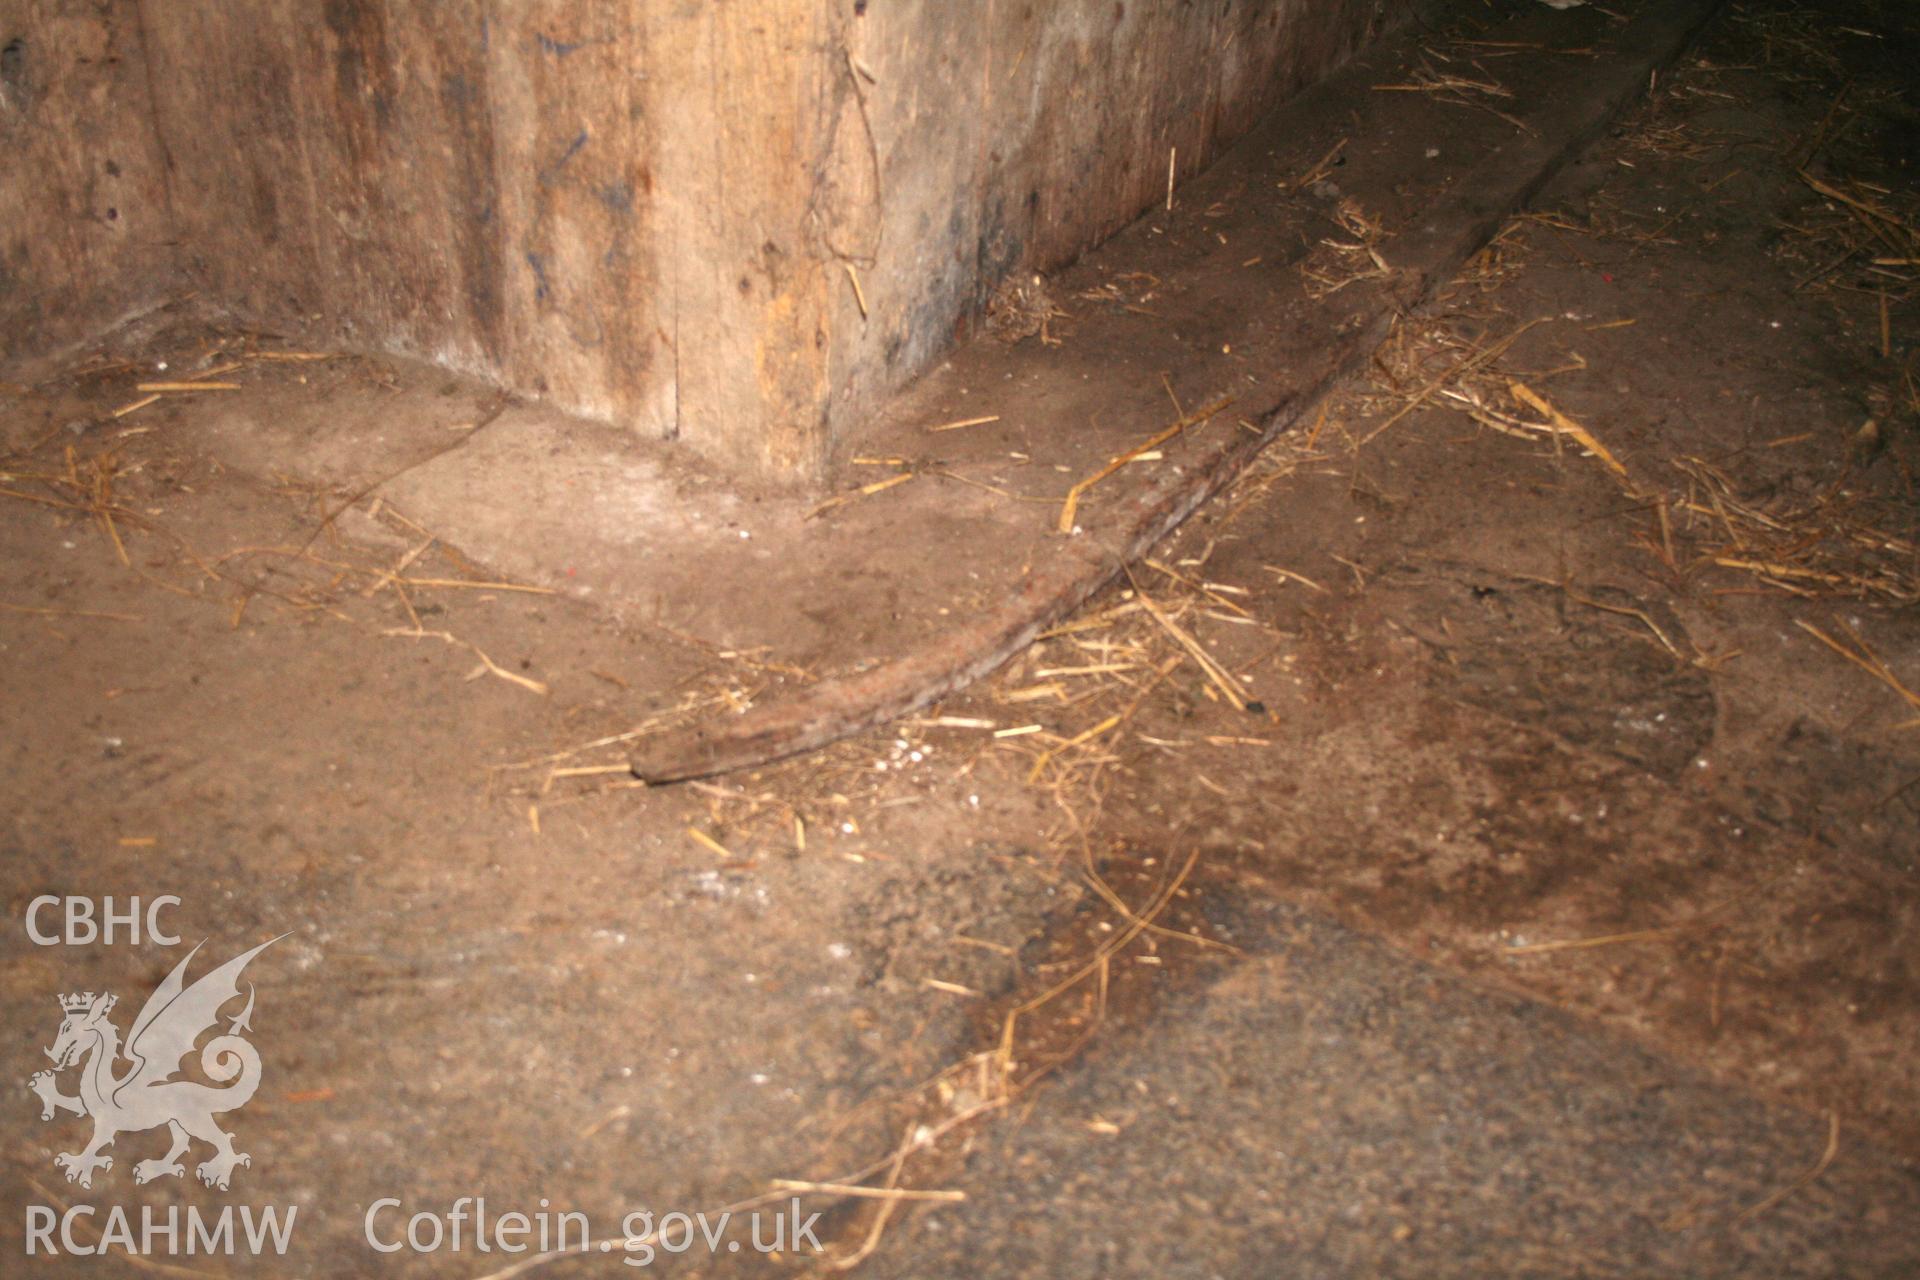 Interior view of concrete flooring. Photographic survey of the northern range of cattle-shelters at Tan-y-Graig Farm, Llanfarian, conducted by Geoff Ward and John Wiles, 11th December 2006.